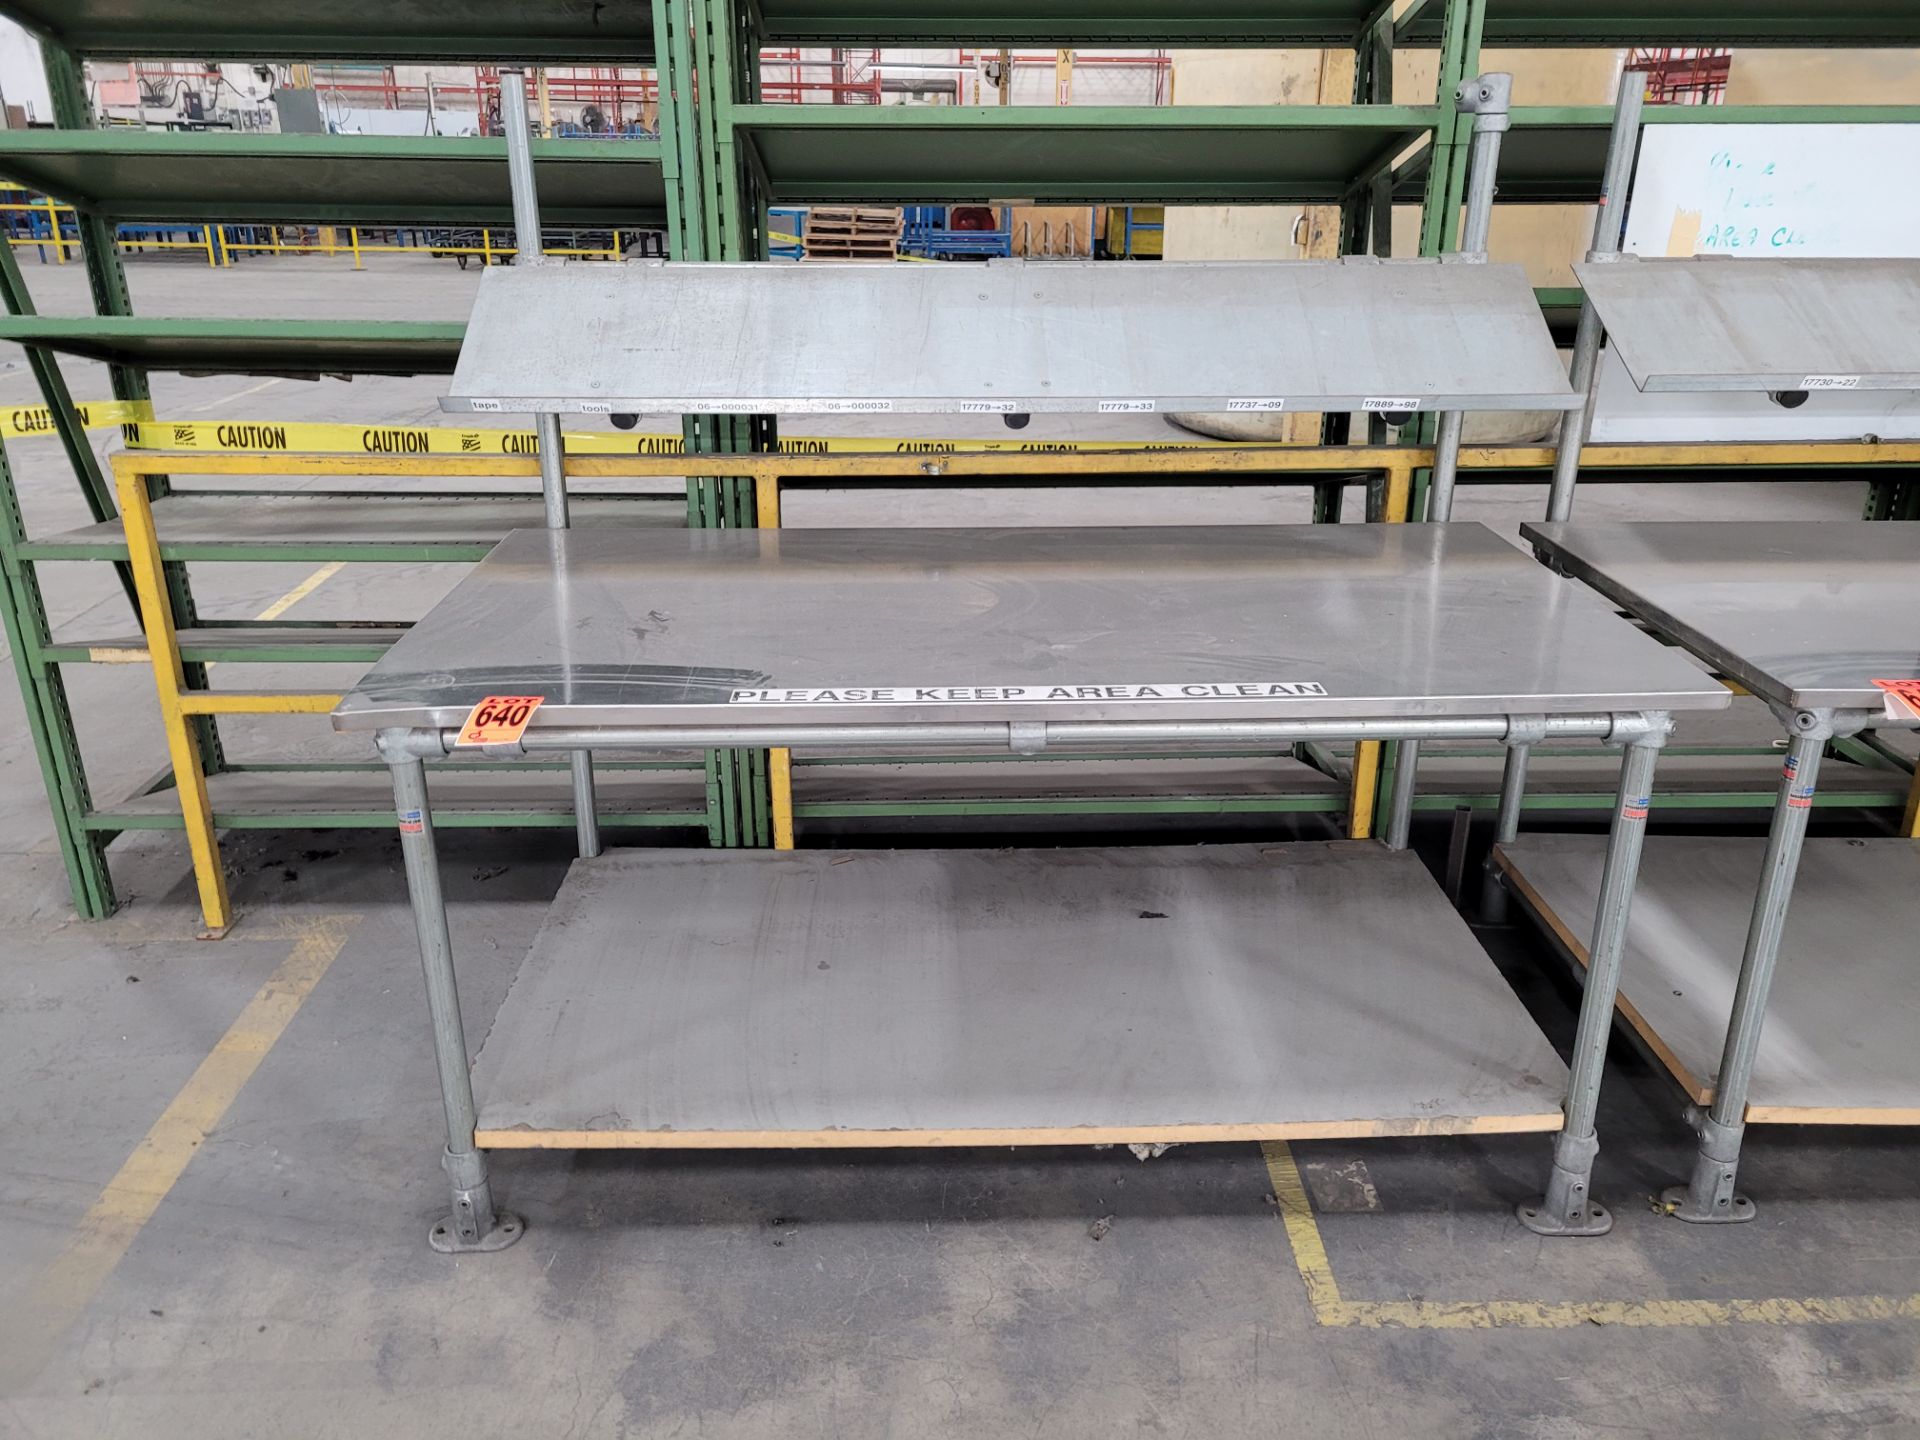 Stainless steel, galvanized steel and plywood worktable w/inclined overhead shelf